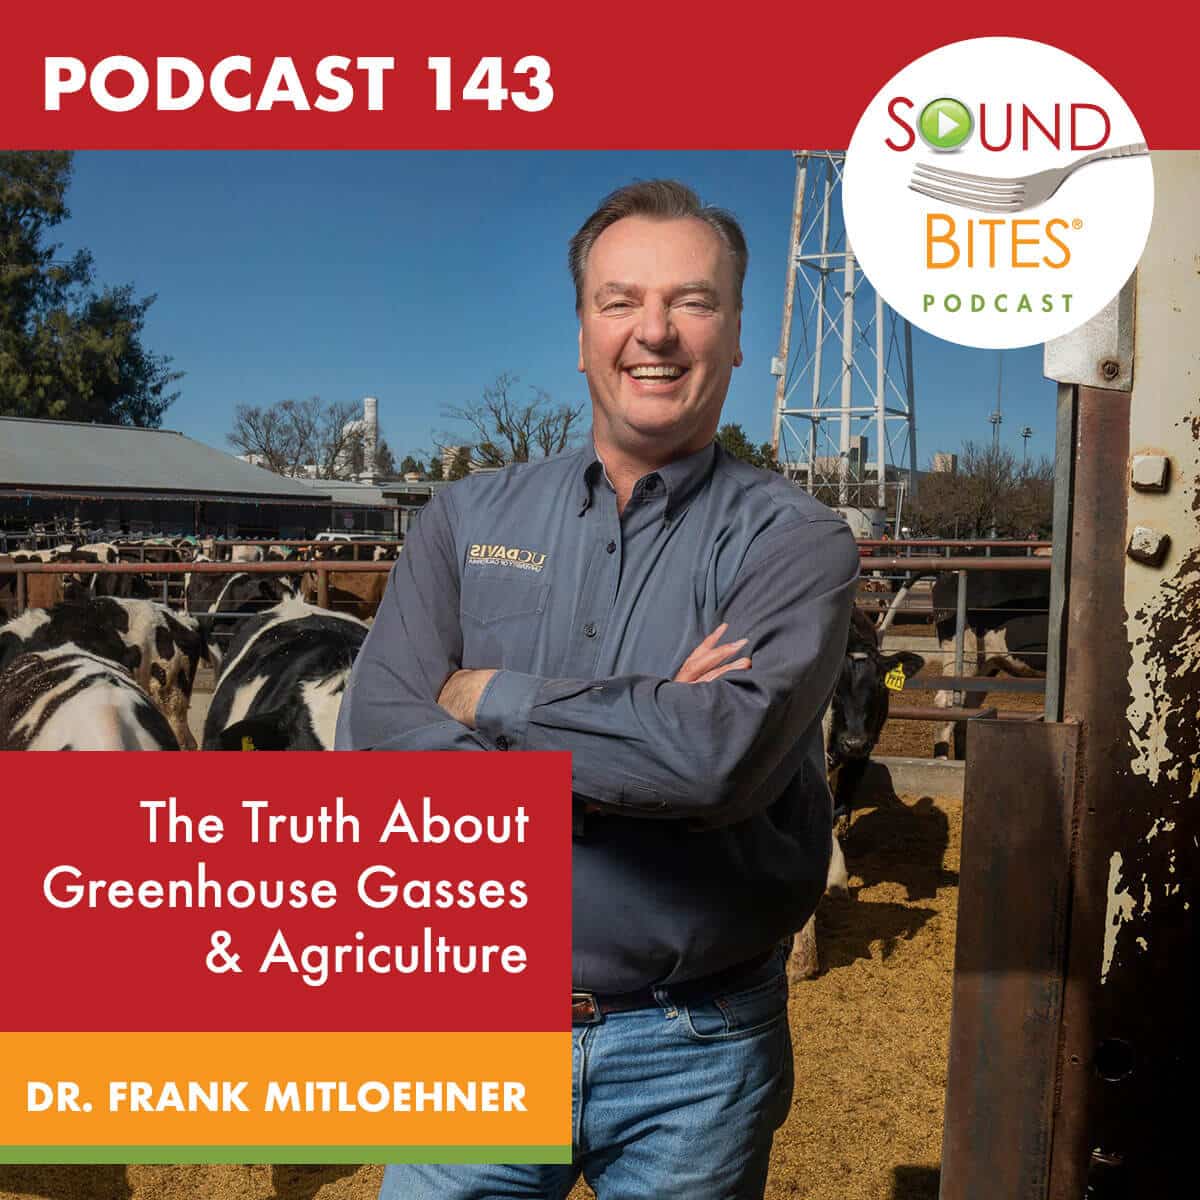 Sound Bites Podcast: Episode 143 The Truth About Greenhouse Gases & Agriculture – Dr. Frank Mitloehner